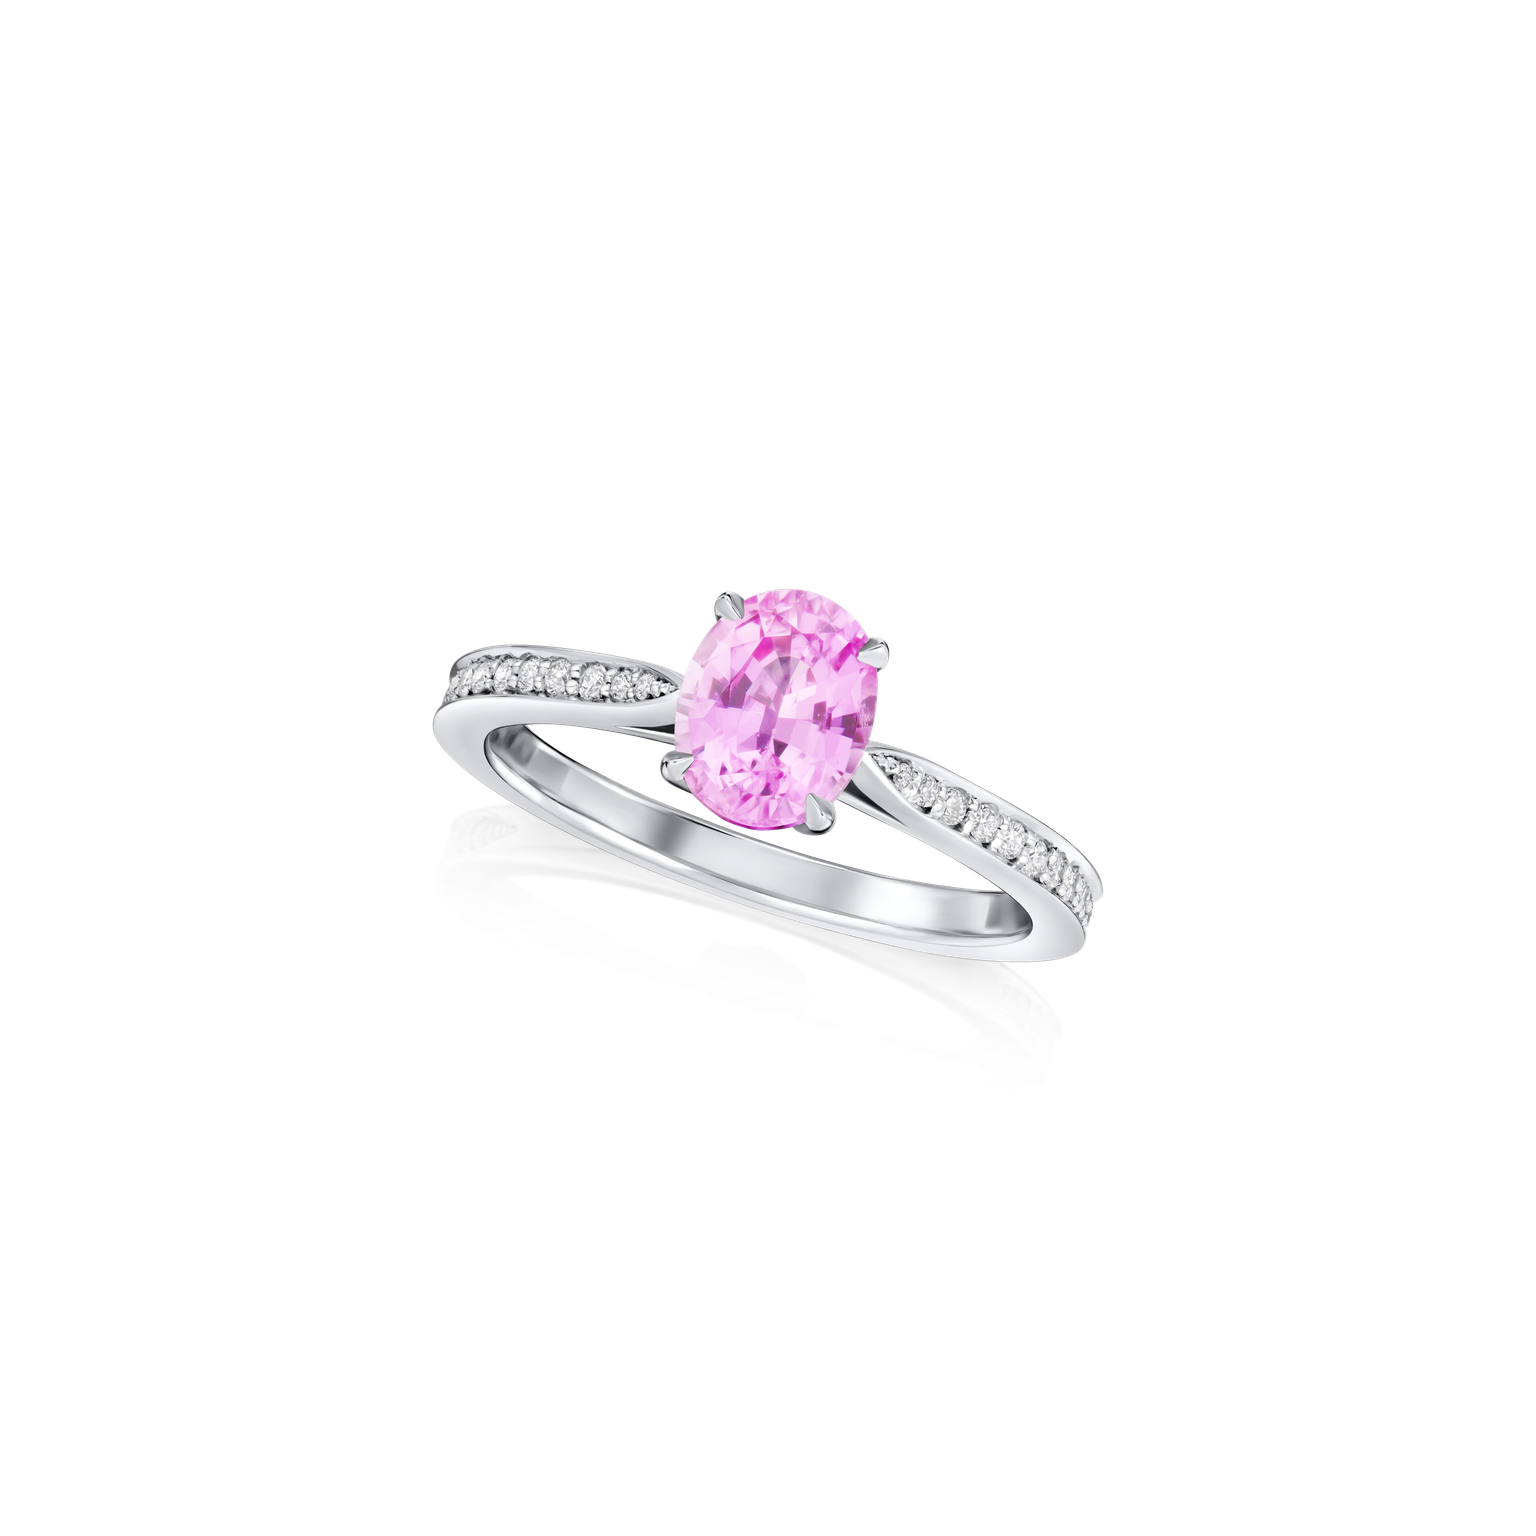 1.22cts Oval-Shape Pink Sapphire and Diamond Ring